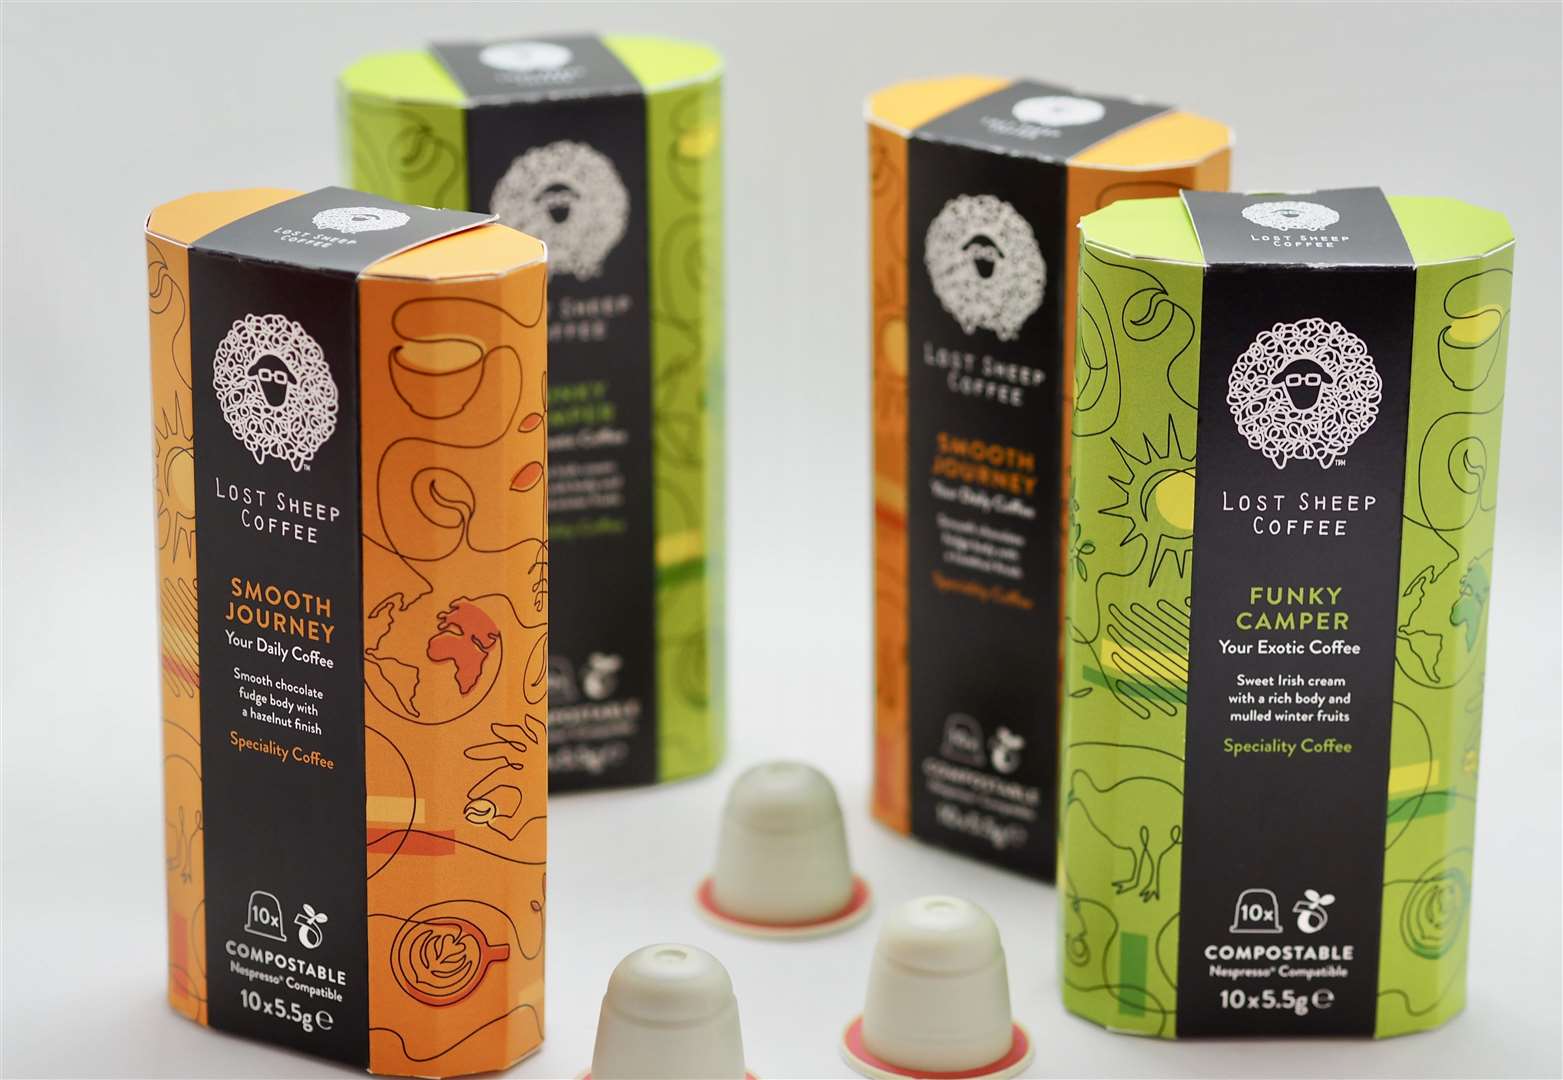 The air-tight compostable coffee pods